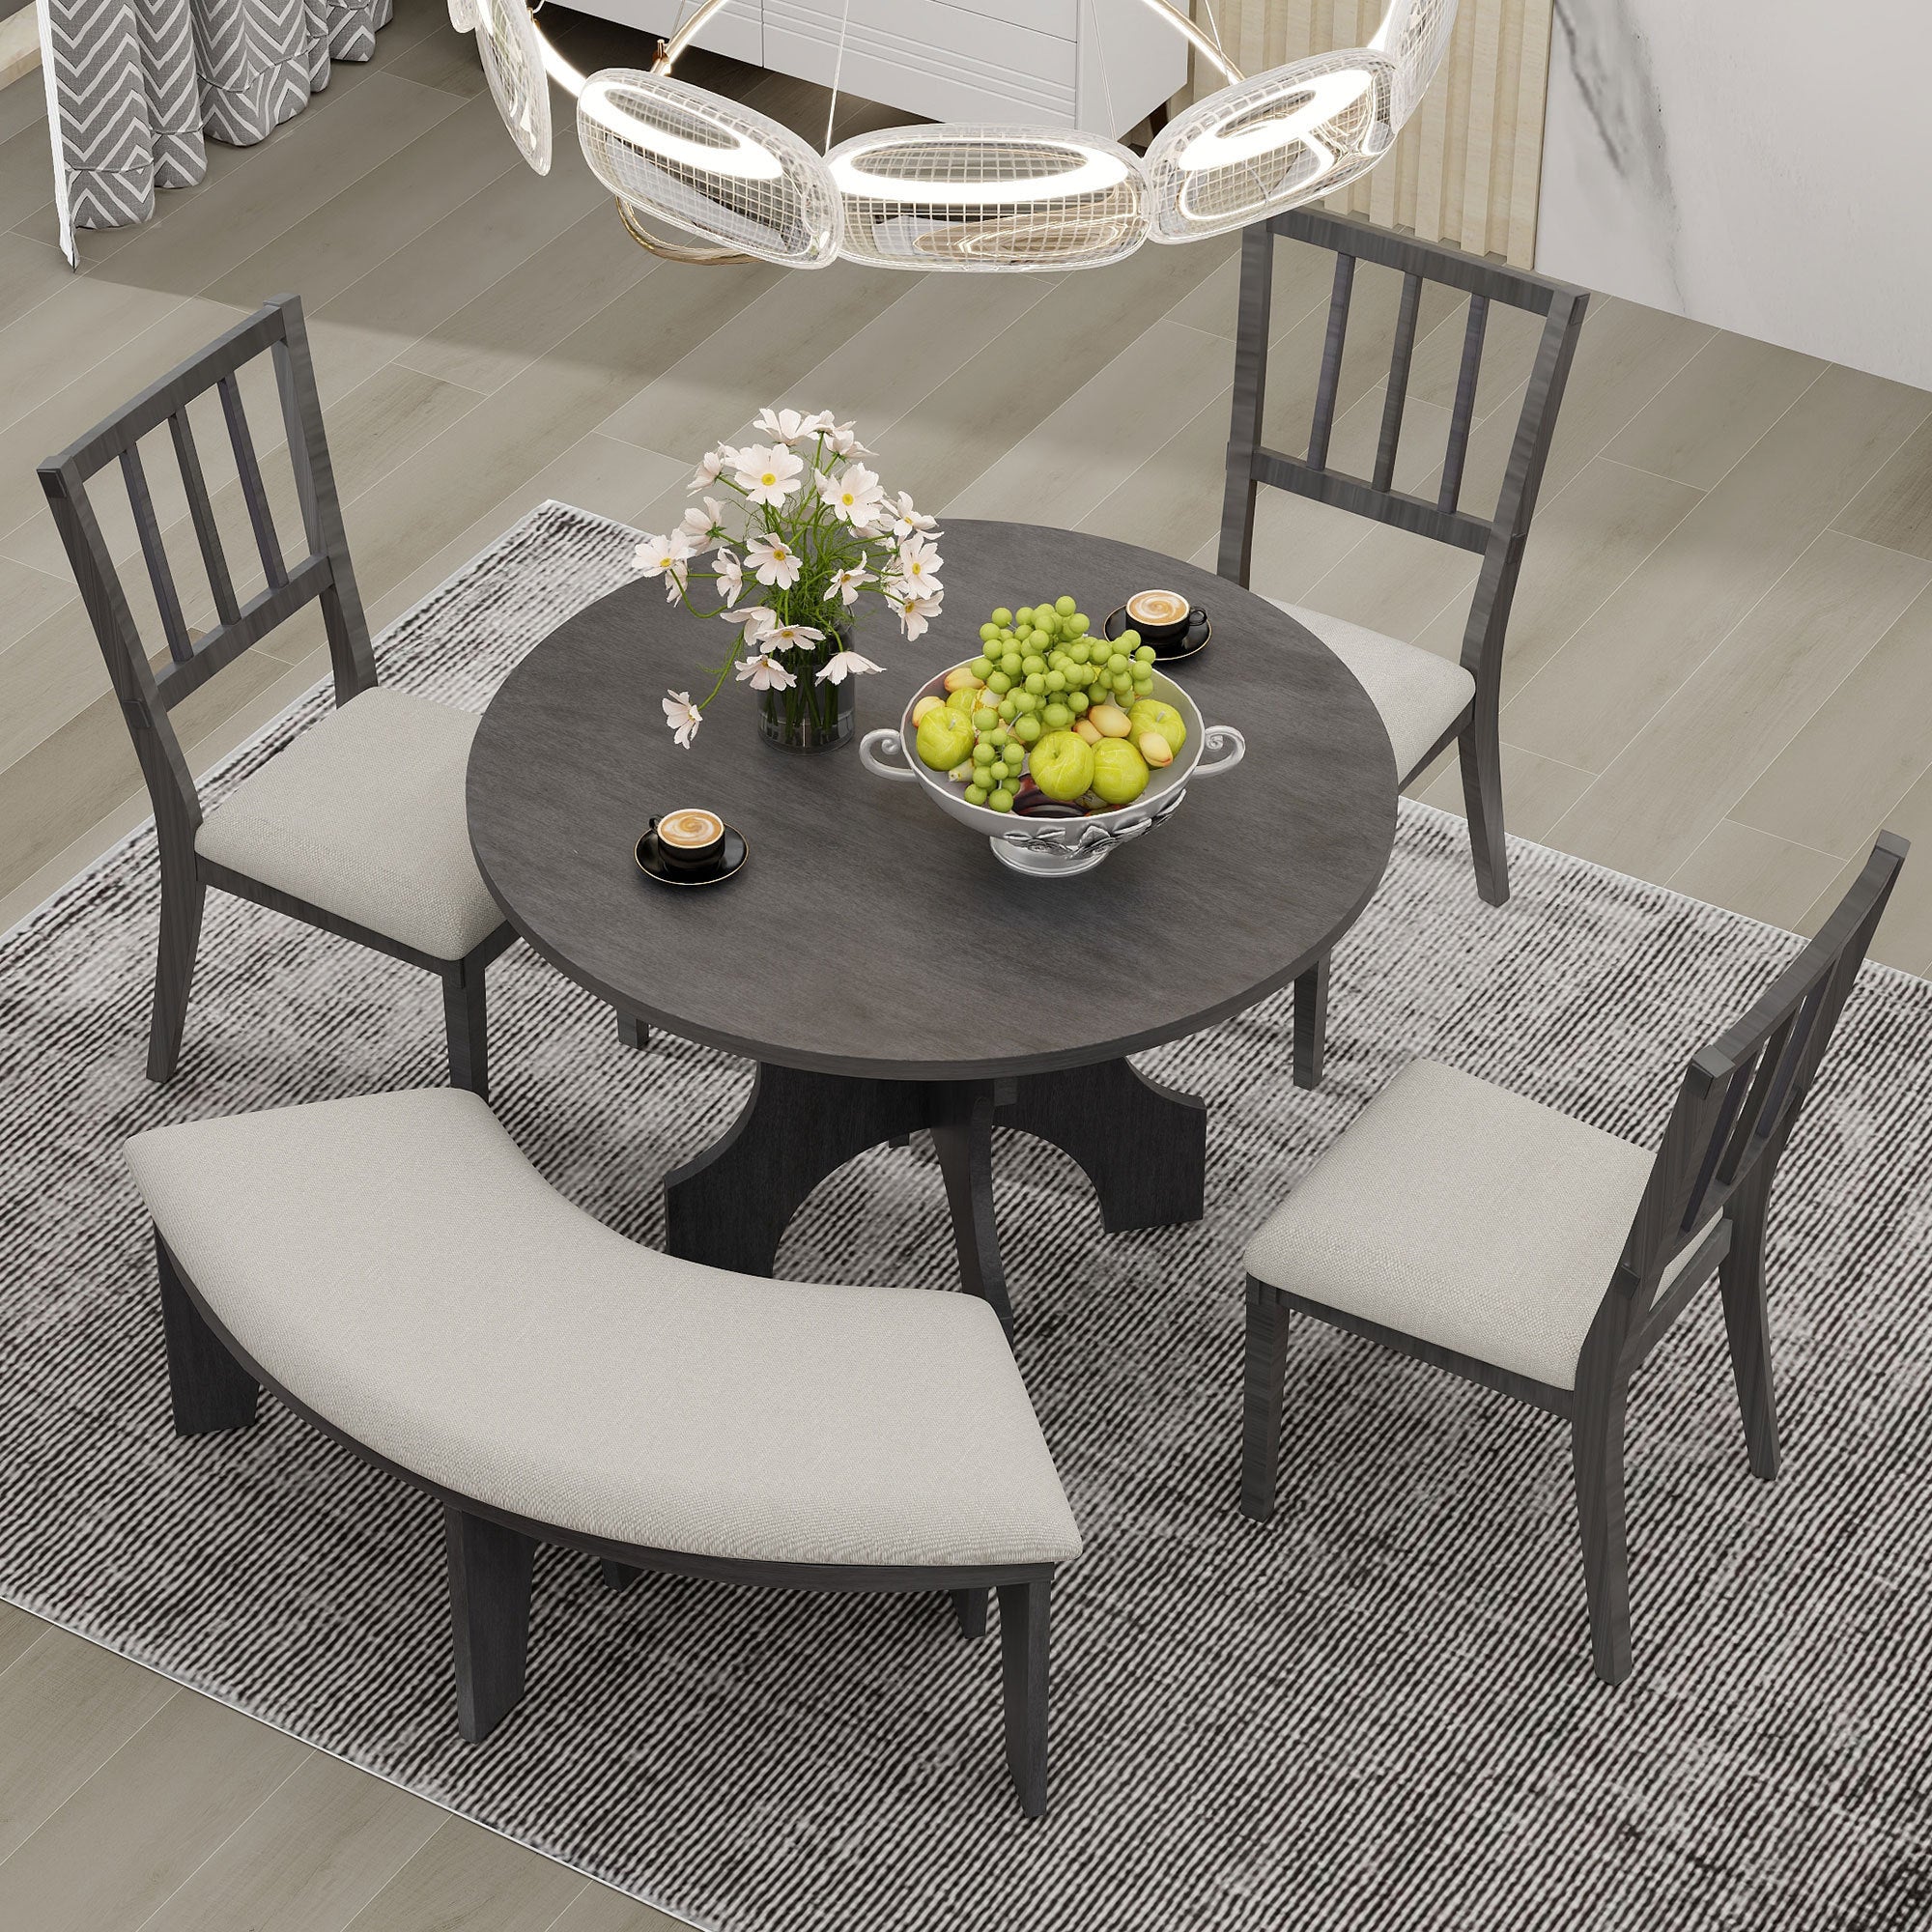 TREXM 5-Piece Dining Table Set, 44" Round Dining Table with Curved Bench & Side Chairs for 4-5 People for Dining Room and Kitchen (Grey)